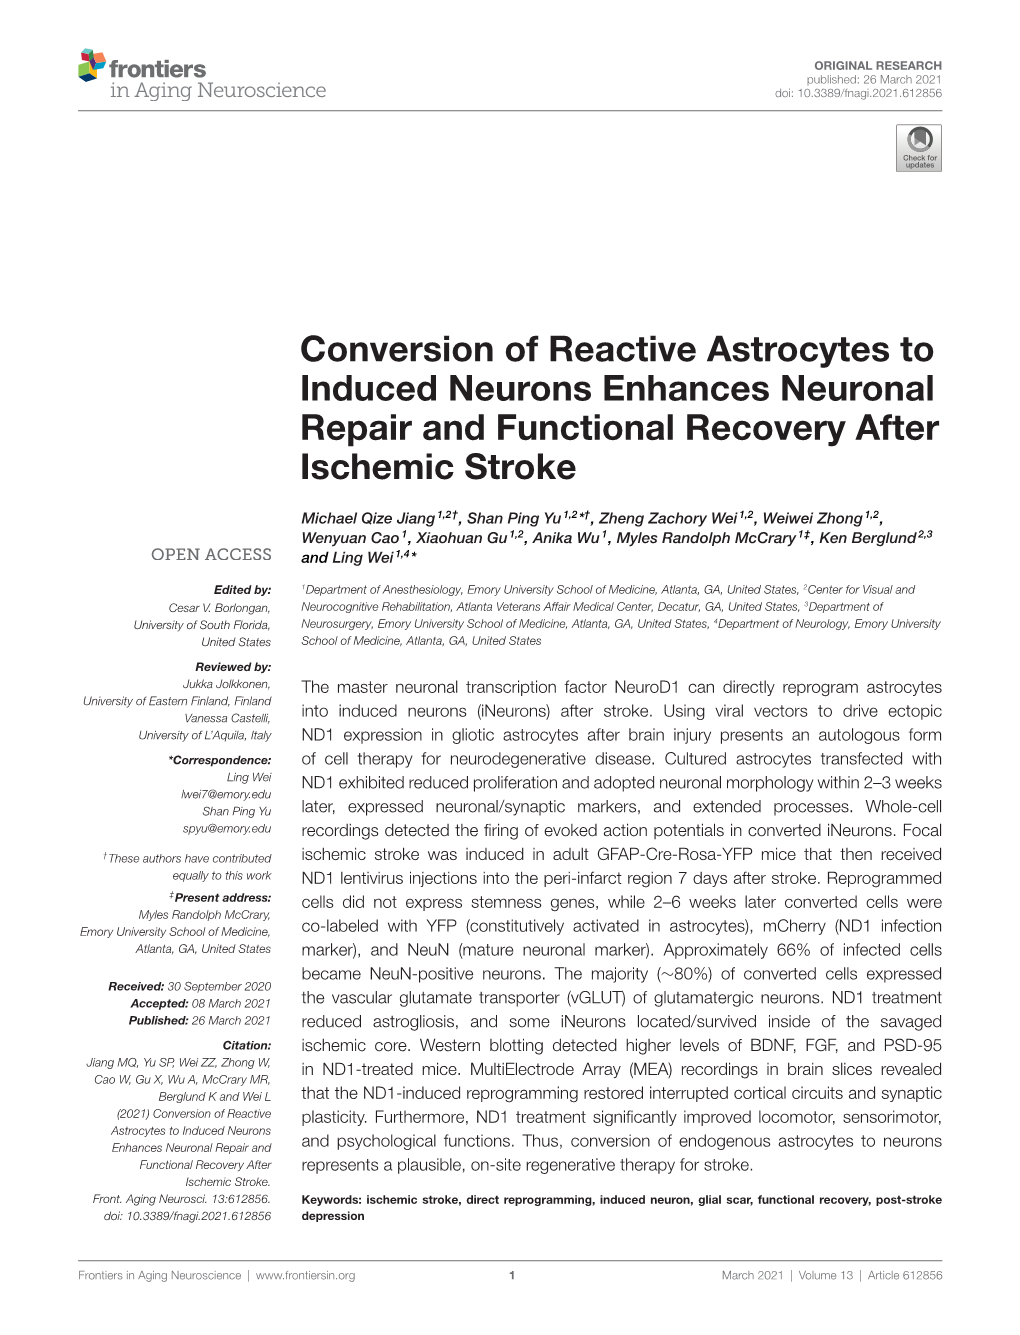 Conversion of Reactive Astrocytes to Induced Neurons Enhances Neuronal Repair and Functional Recovery After Ischemic Stroke